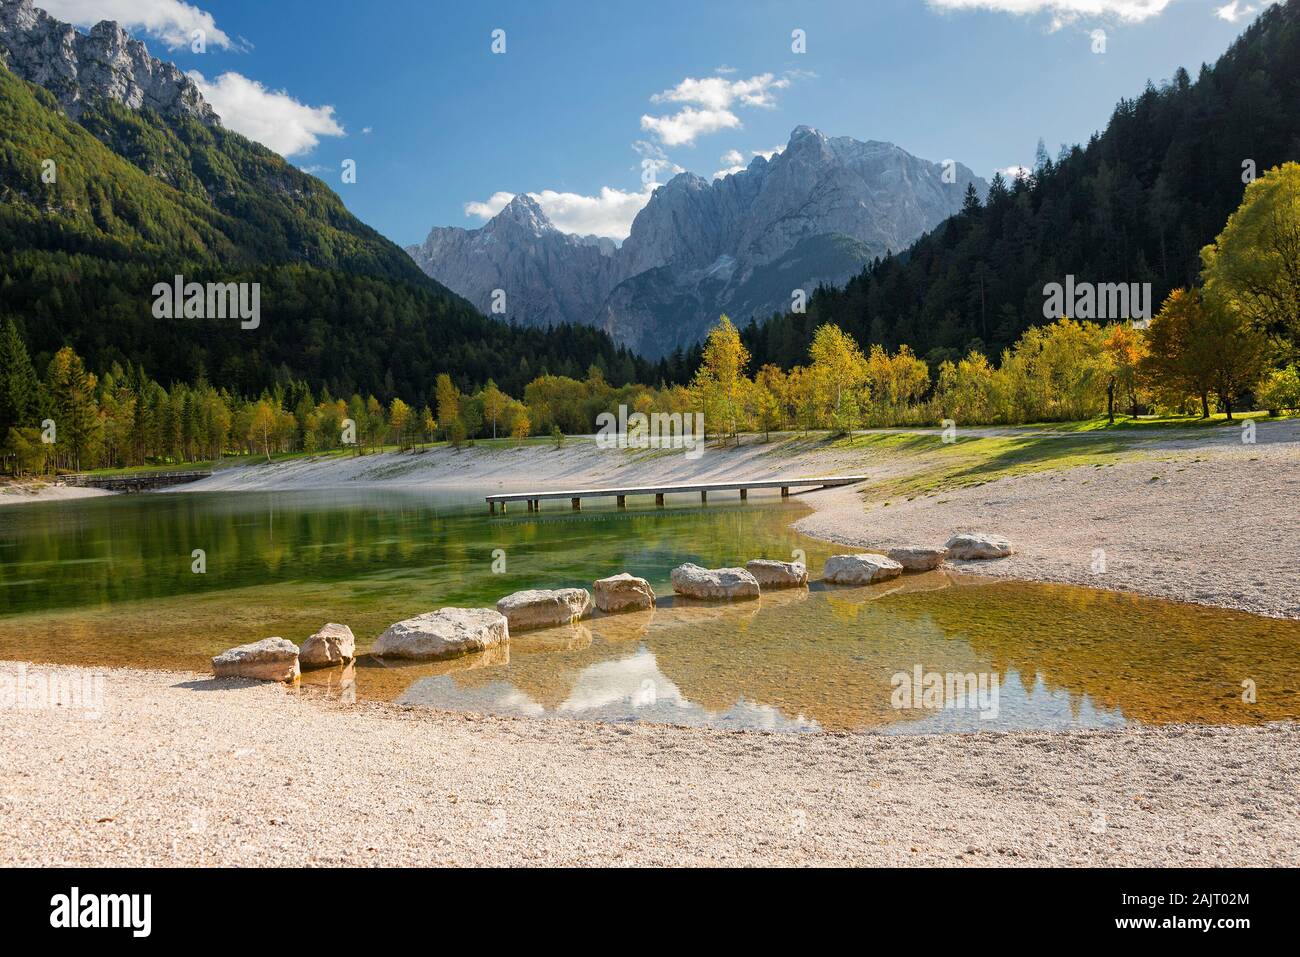 The alpine Lake Jasna with big rocks in the water and surrounded by trees in autumn colors and Alps mountains near Kranjska Gora in Slovenia. Stock Photo